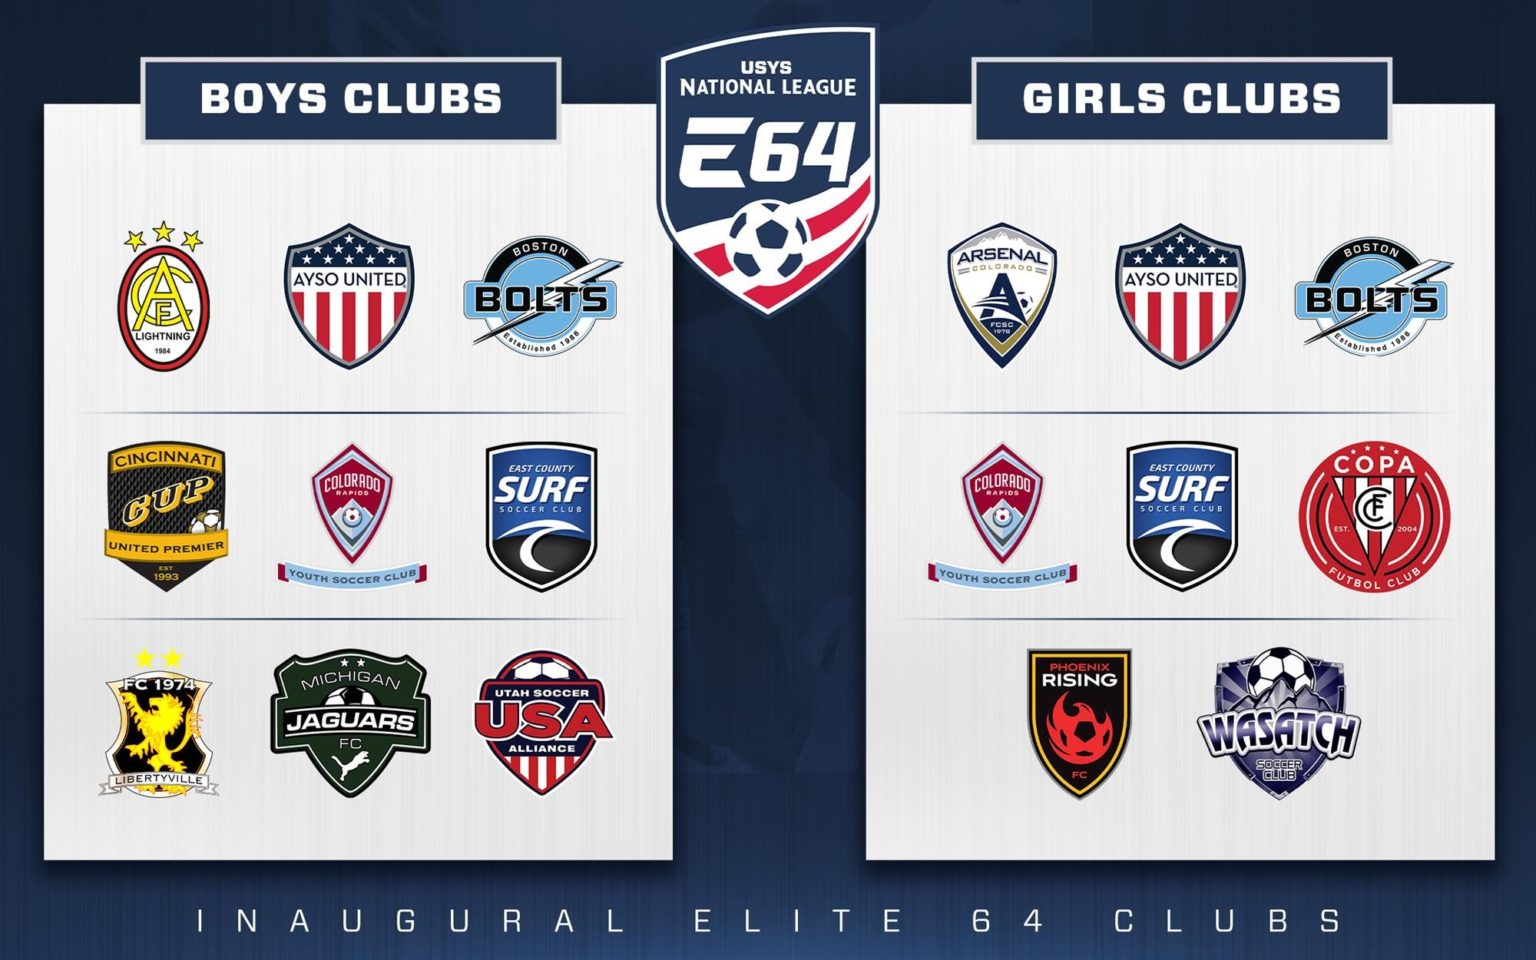 USYS NATIONAL LEAGUE ELITE 64 GROWS WITH MORE YOUTH SOCCER CLUBS